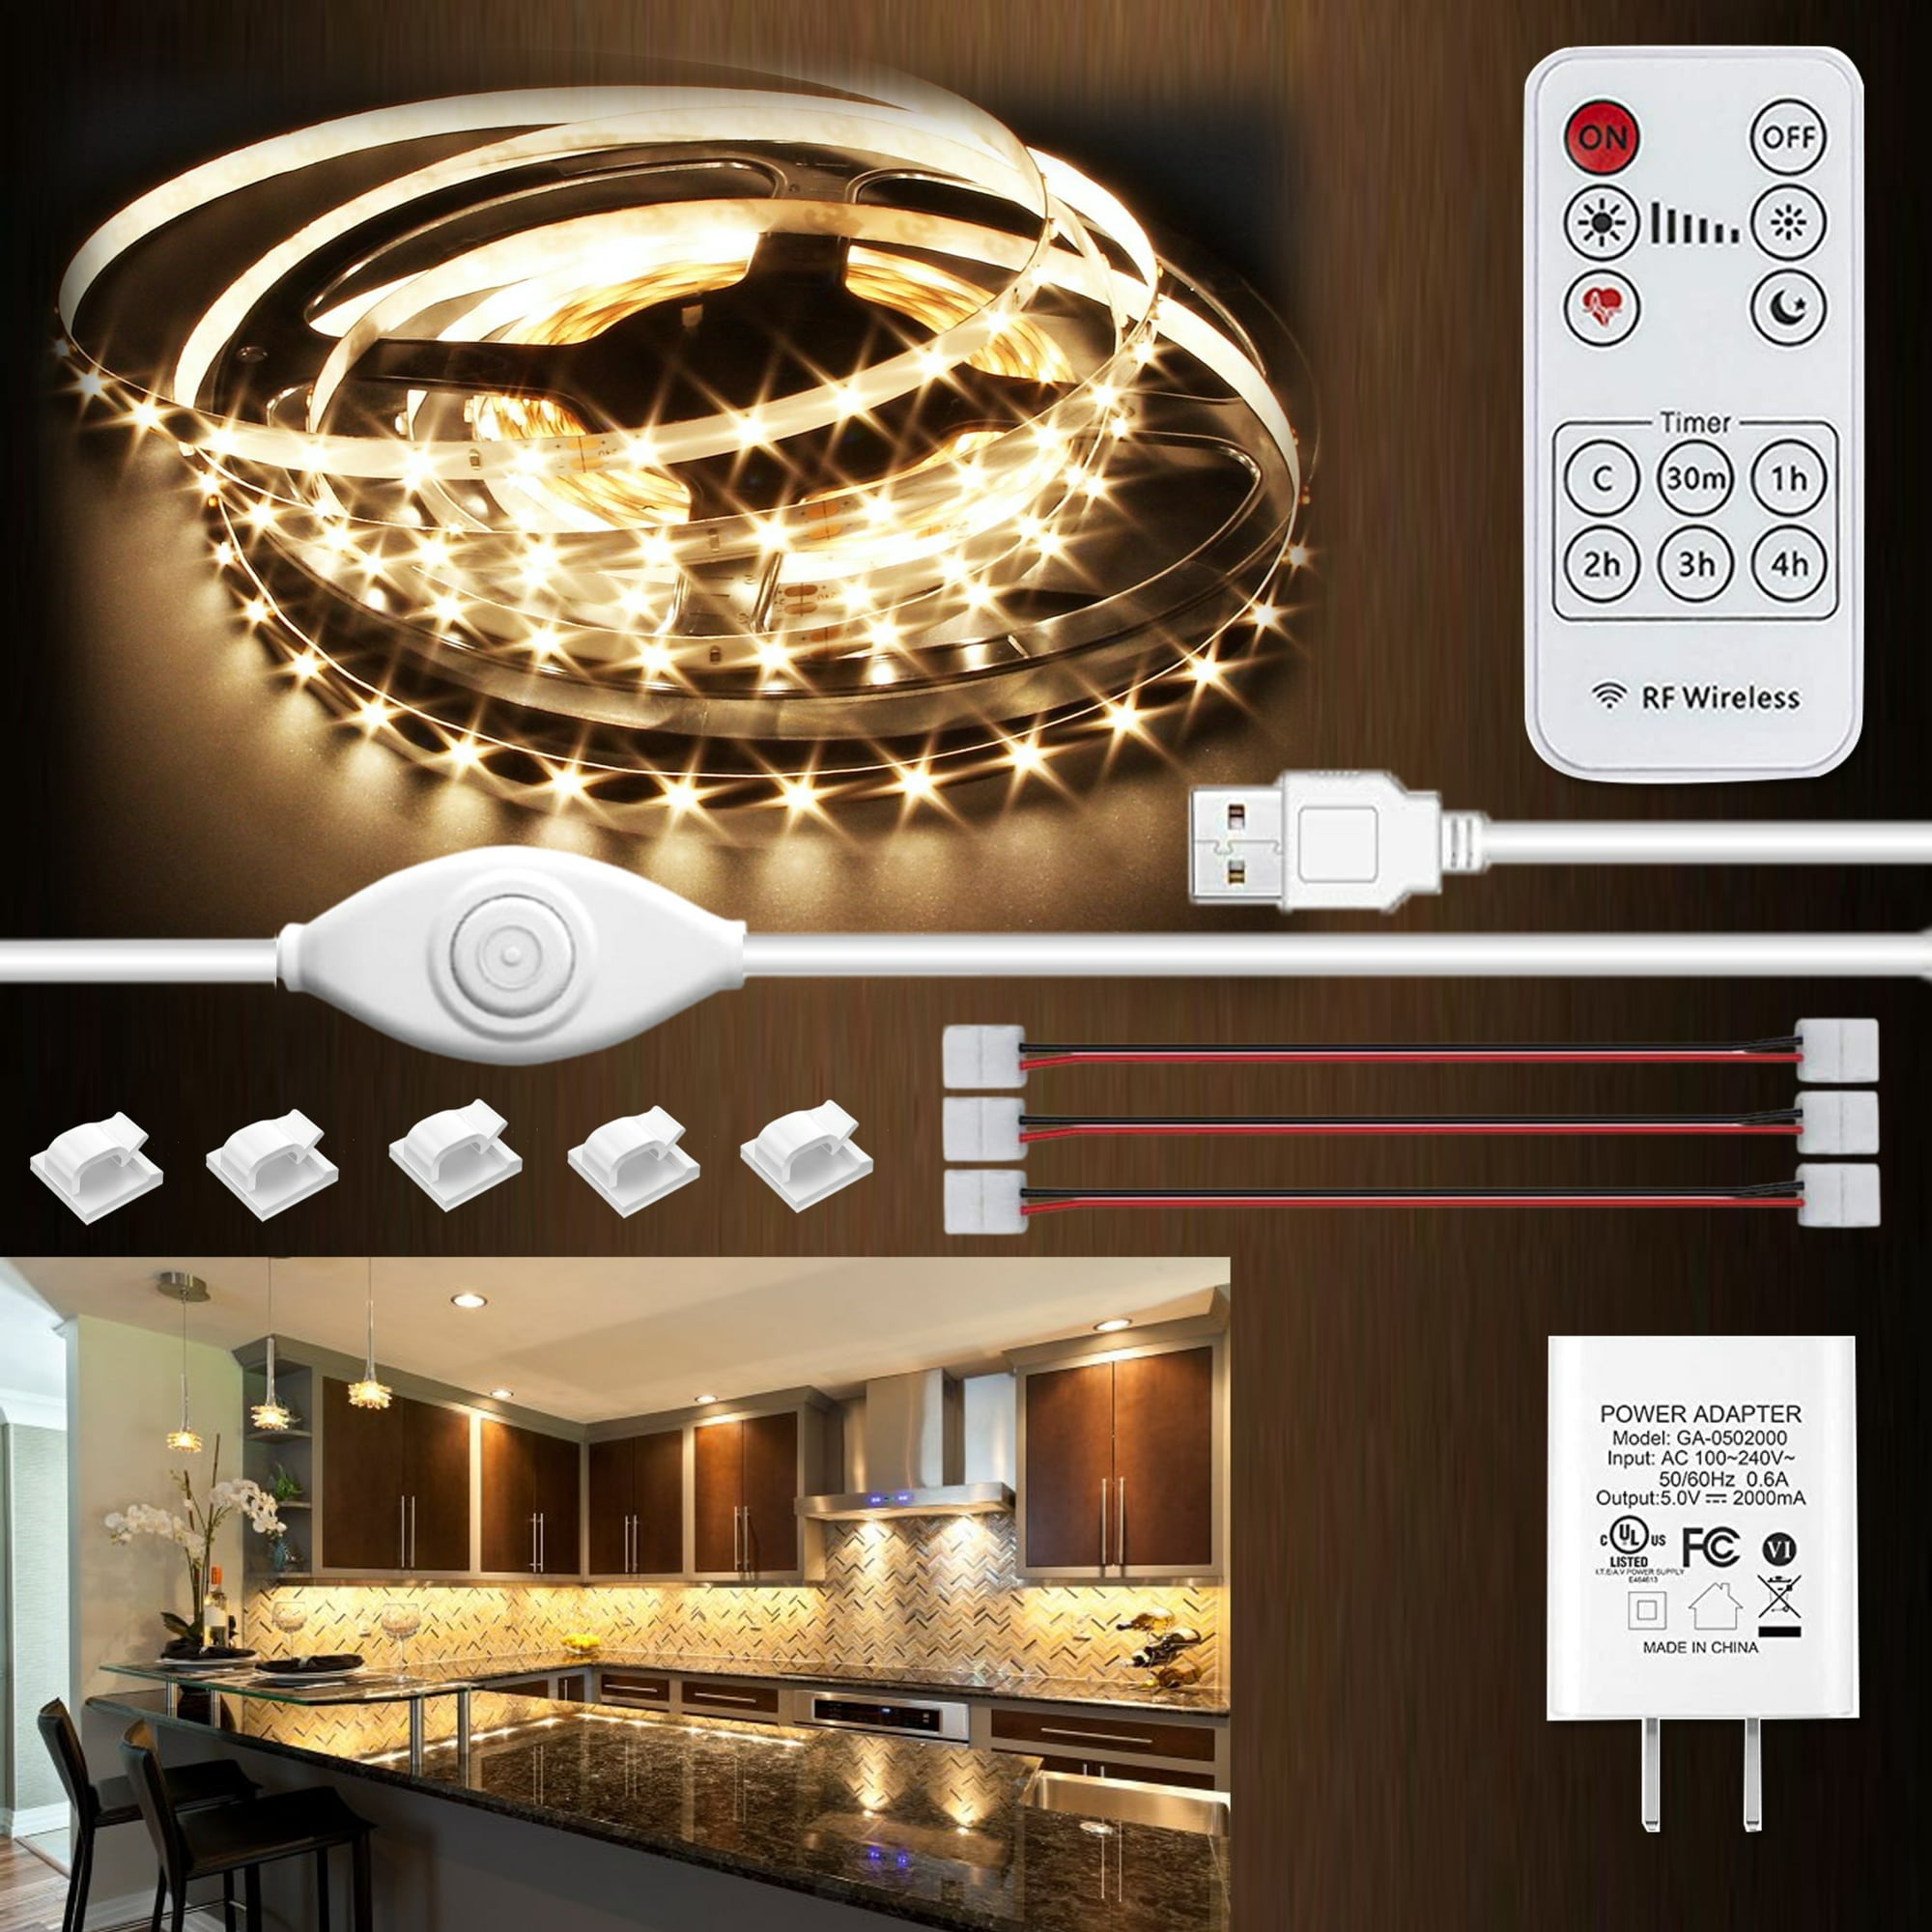 Perseus Drama uddanne illuminlabs Under Cabinet Lights, LED Strip Lights with Remote Control,  Dimmable for Closet, Shelf, TV Back, Under Counter Lights For Kitchen,  13.2ft, Warm White - Walmart.com